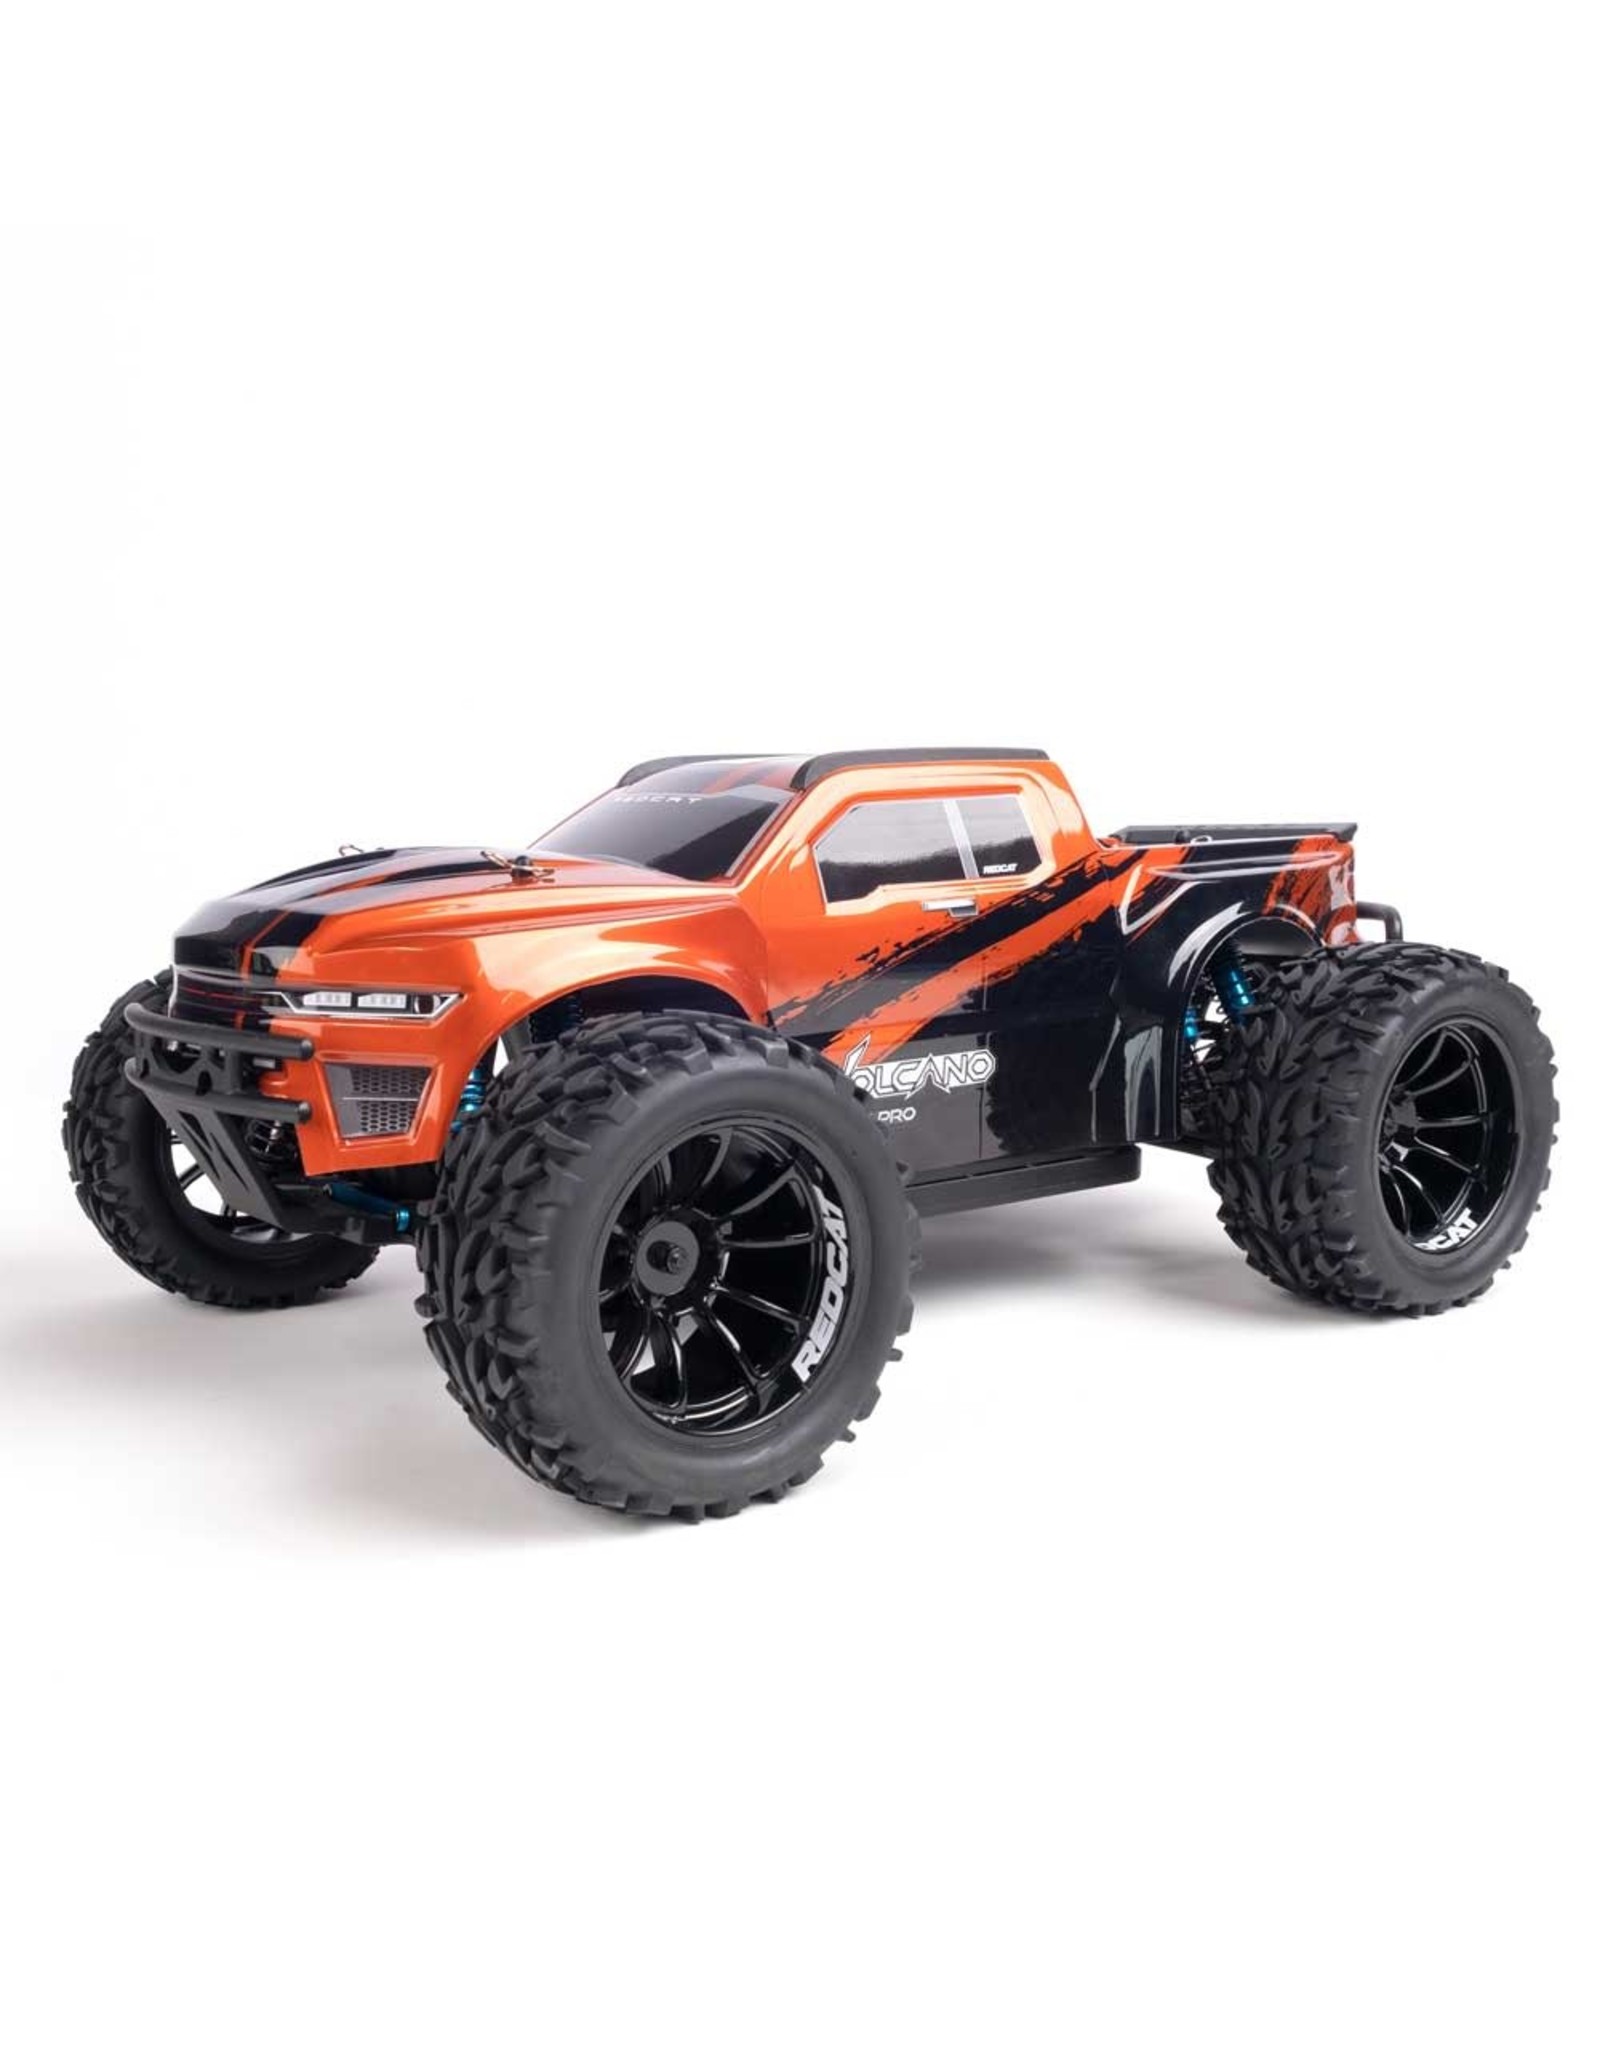 Redcat Racing Redcat Volcano EPX PRO RC Offroad Truck 1:10 Brushless Electric Truck